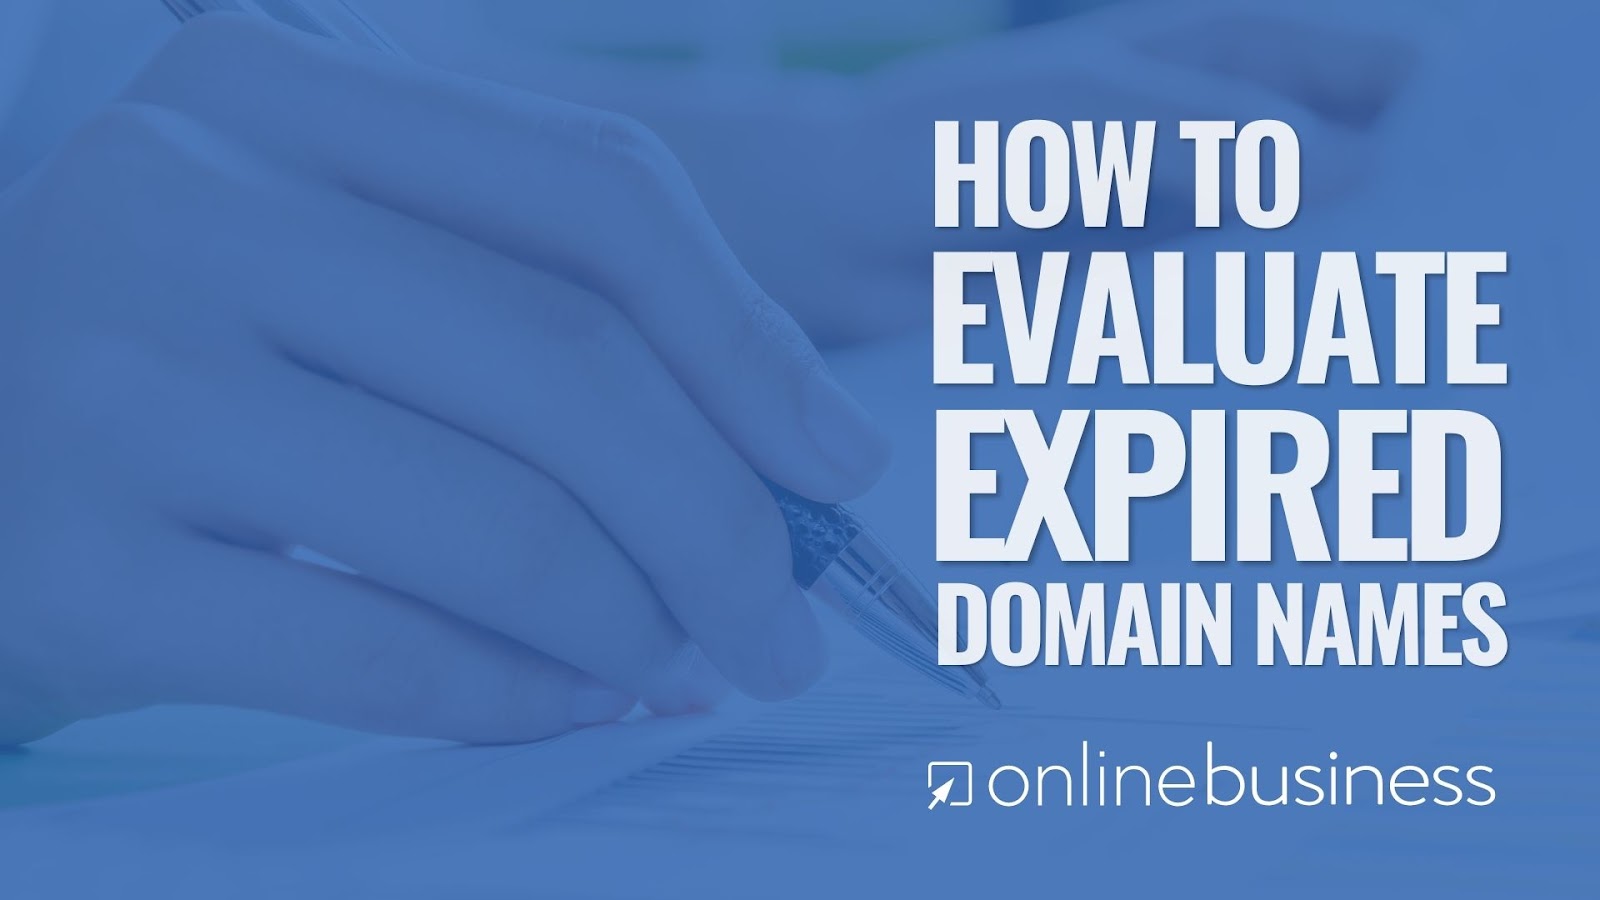 OnlineBusiness.com Offers Tips on How to Evaluate an Expired Domain Name